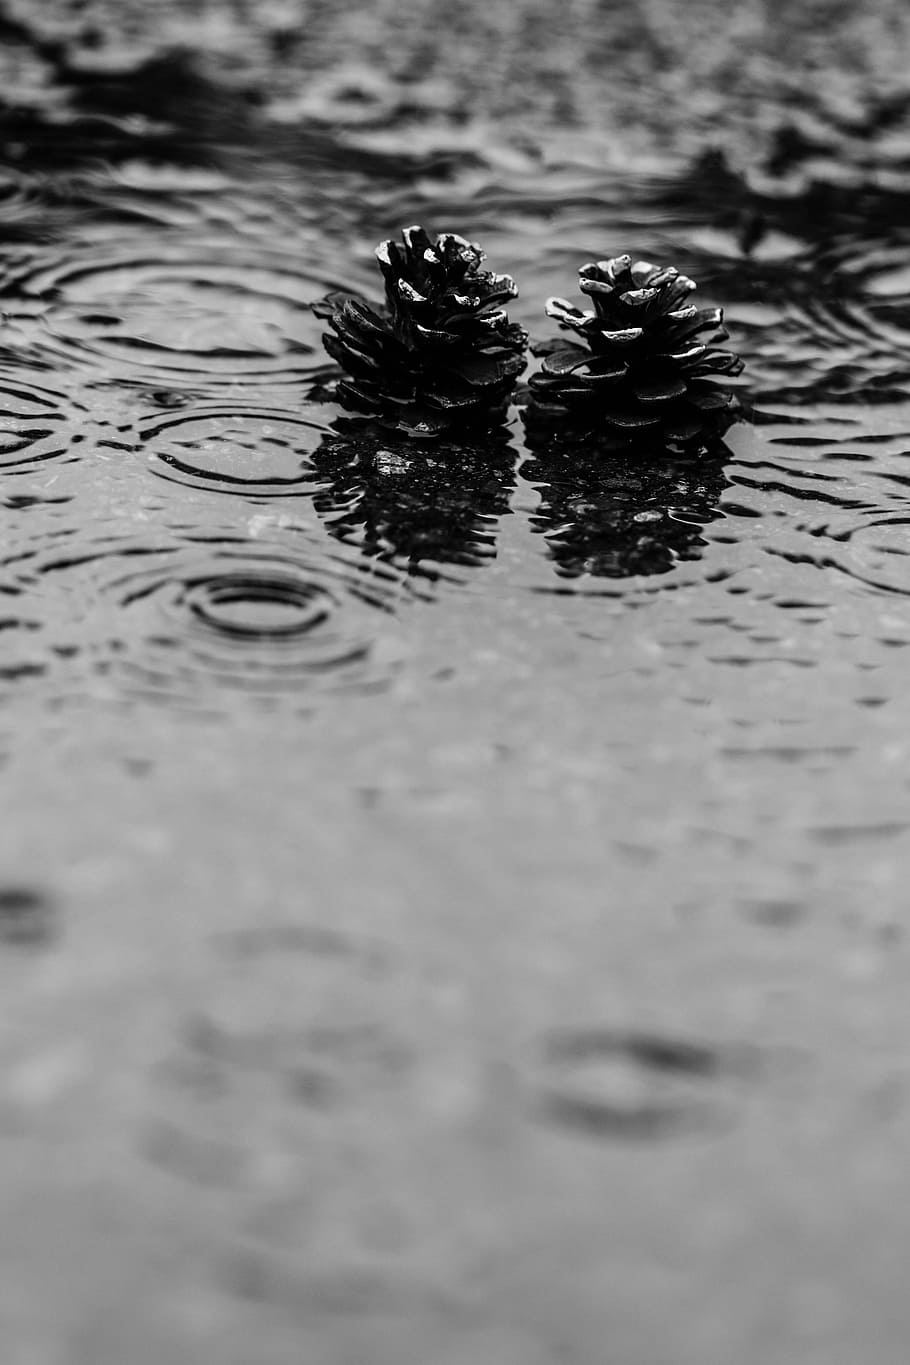 Pinecone, Puddle, Rain, Water, Nature, rain, water, rippled, animal themes, waterfront, selective focus